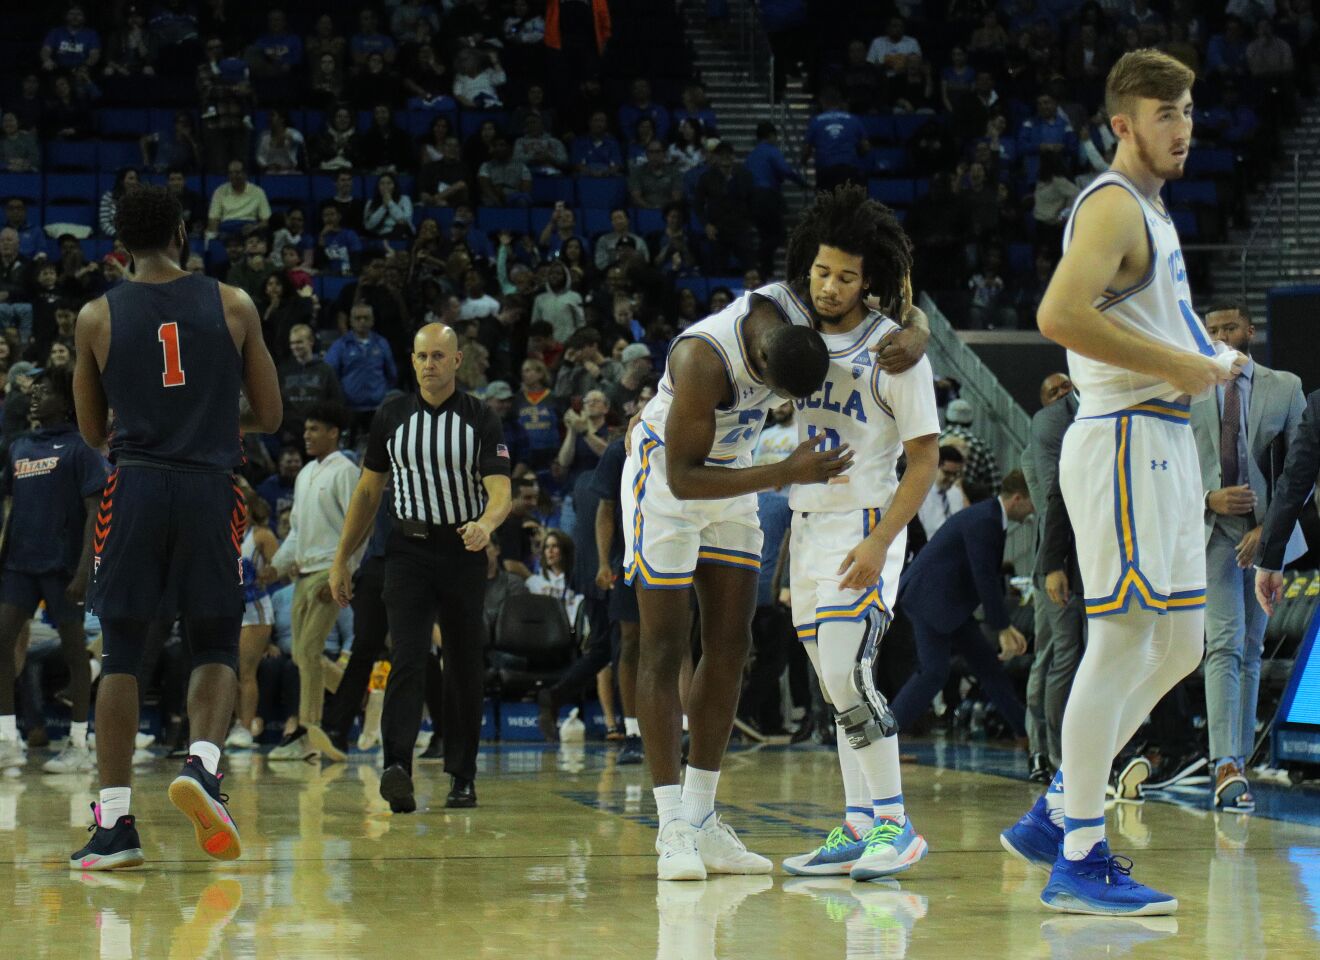 WESTWOOD, CA - DECEMBER 28, 2019: UCLA Bruins guard Tyger Campbell (10) consoles UCLA Bruins guard Prince Ali (23) after Ali turned the ball her in the final seconds of the Bruins 77-74 loss to Cal State Fullerton at Pauley Pavilion on December 28, 2019 in Westwood, California.(Gina Ferazzi/Los AngelesTimes)